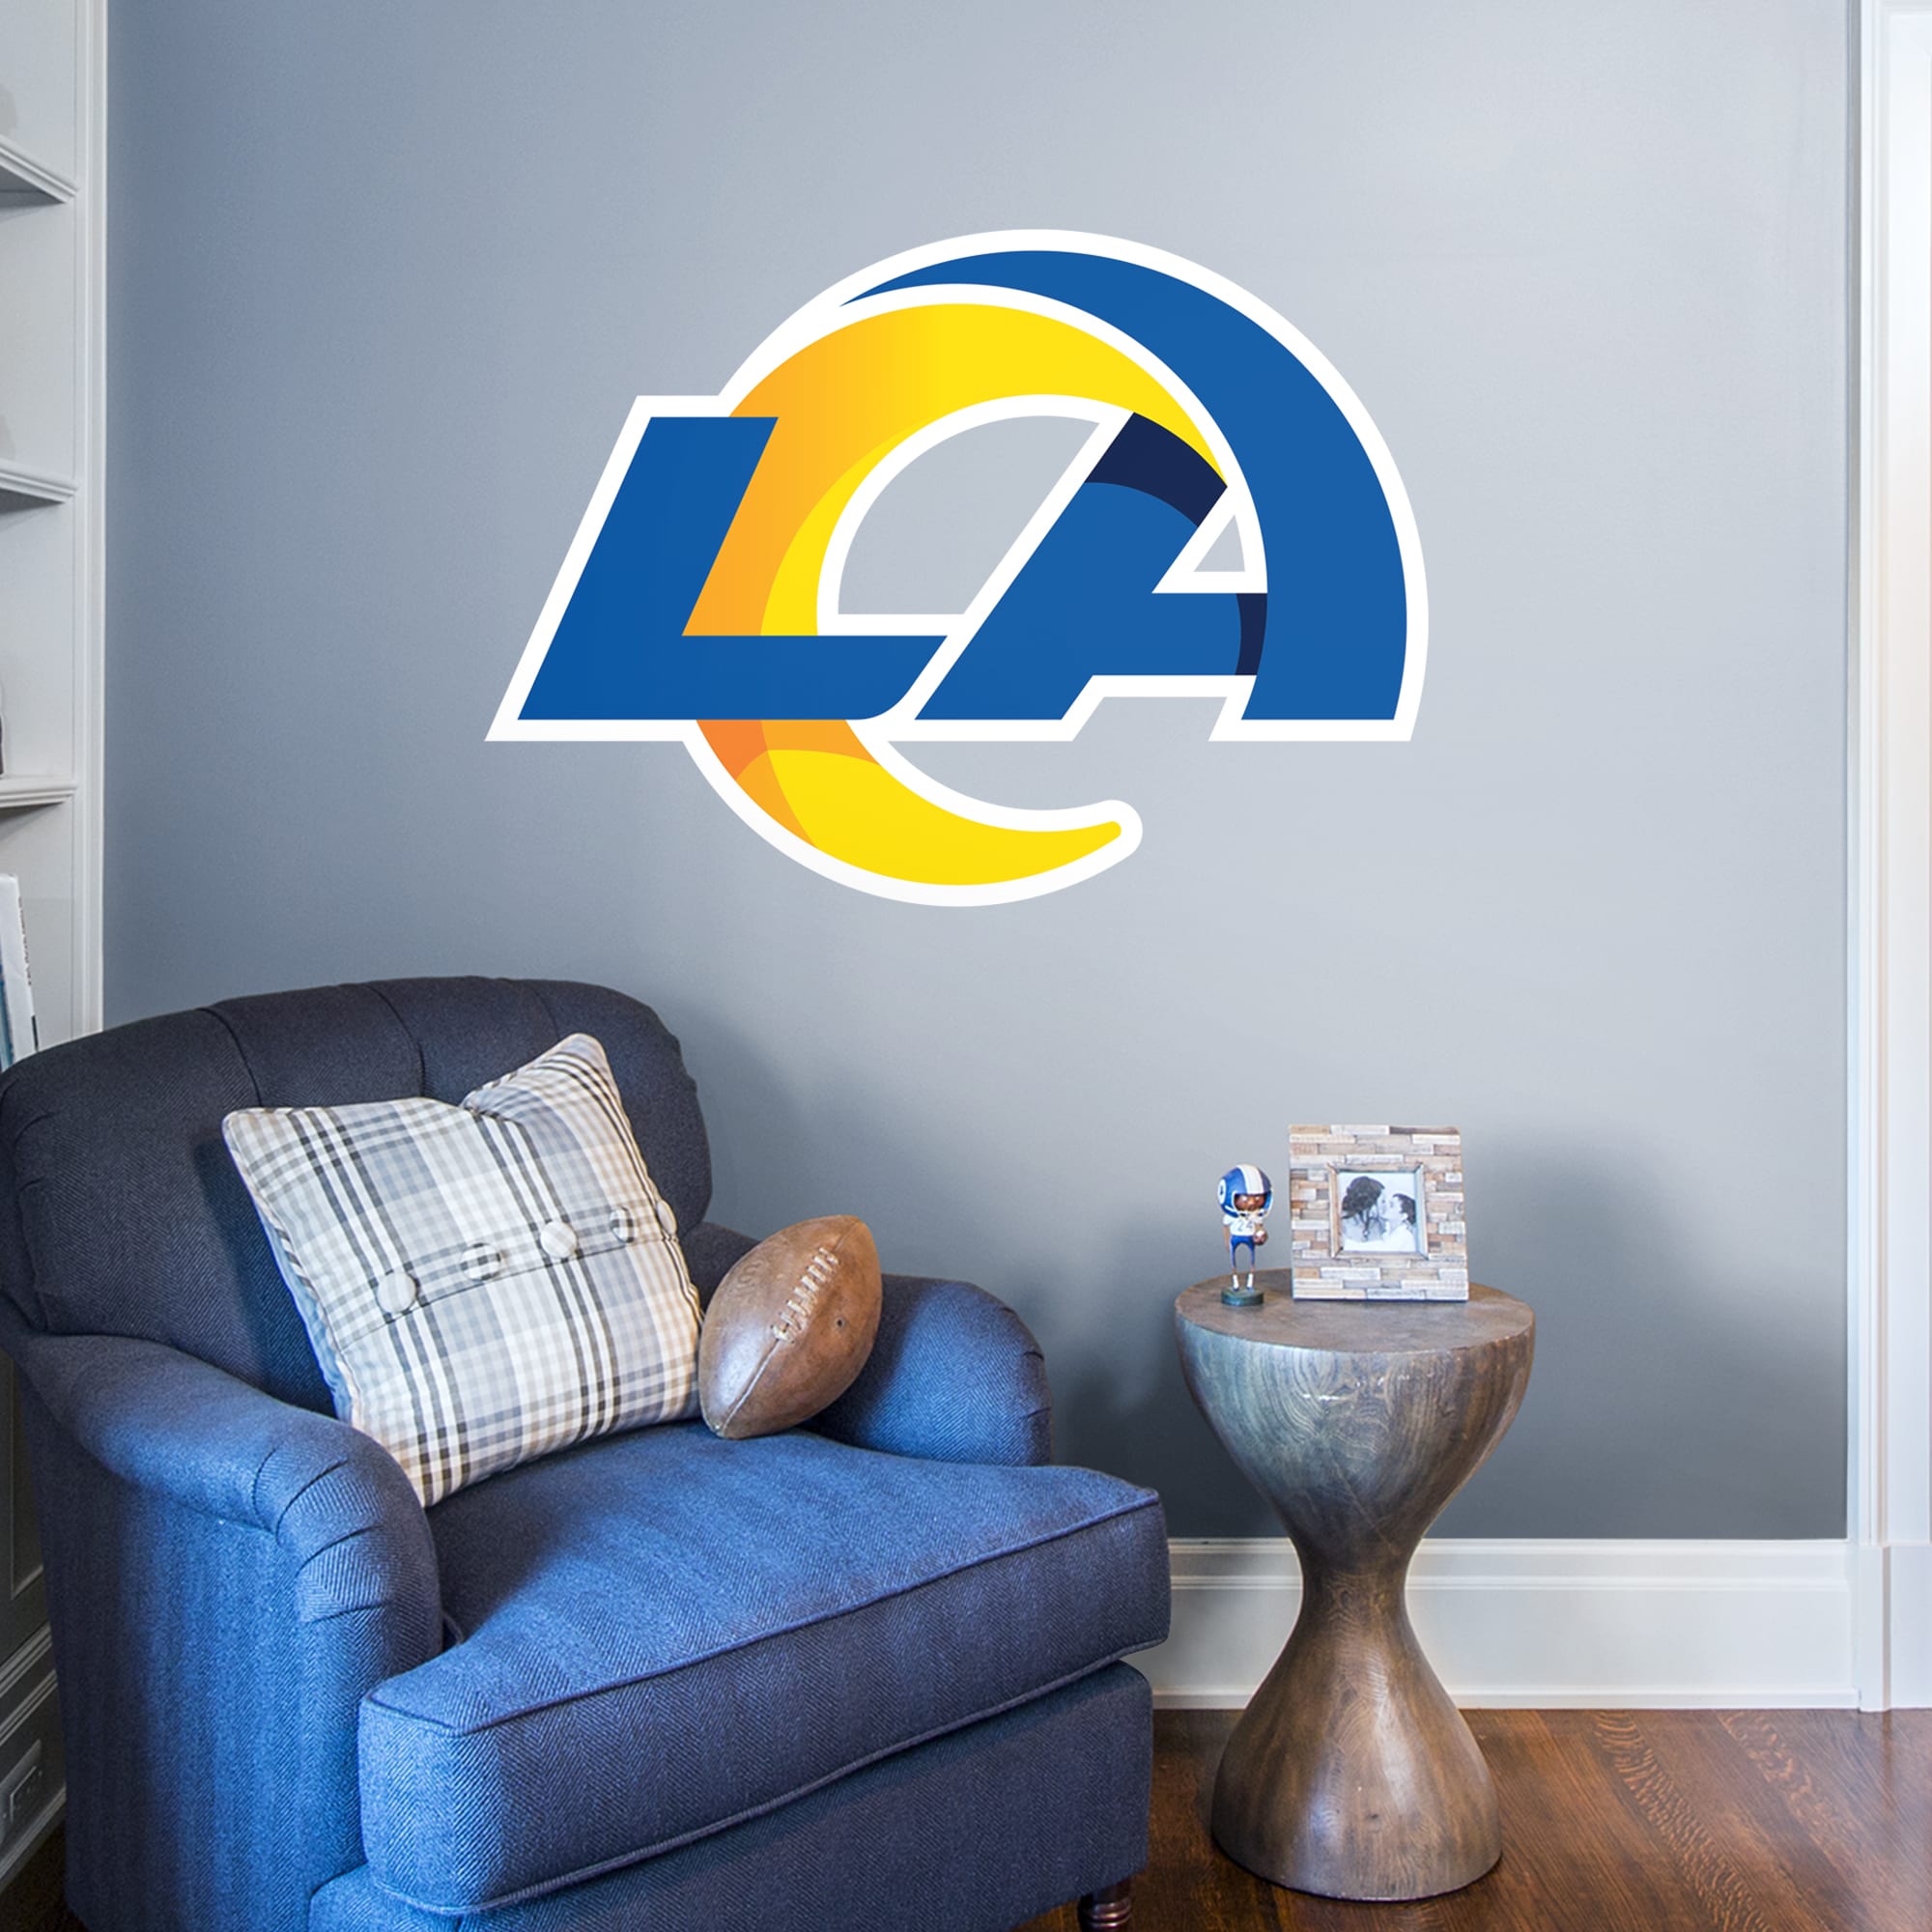 Los Angeles Rams: Logo - Officially Licensed NFL Removable Wall Decal Giant Logo + 7 Decals (46"W x 33"H) by Fathead | Vinyl